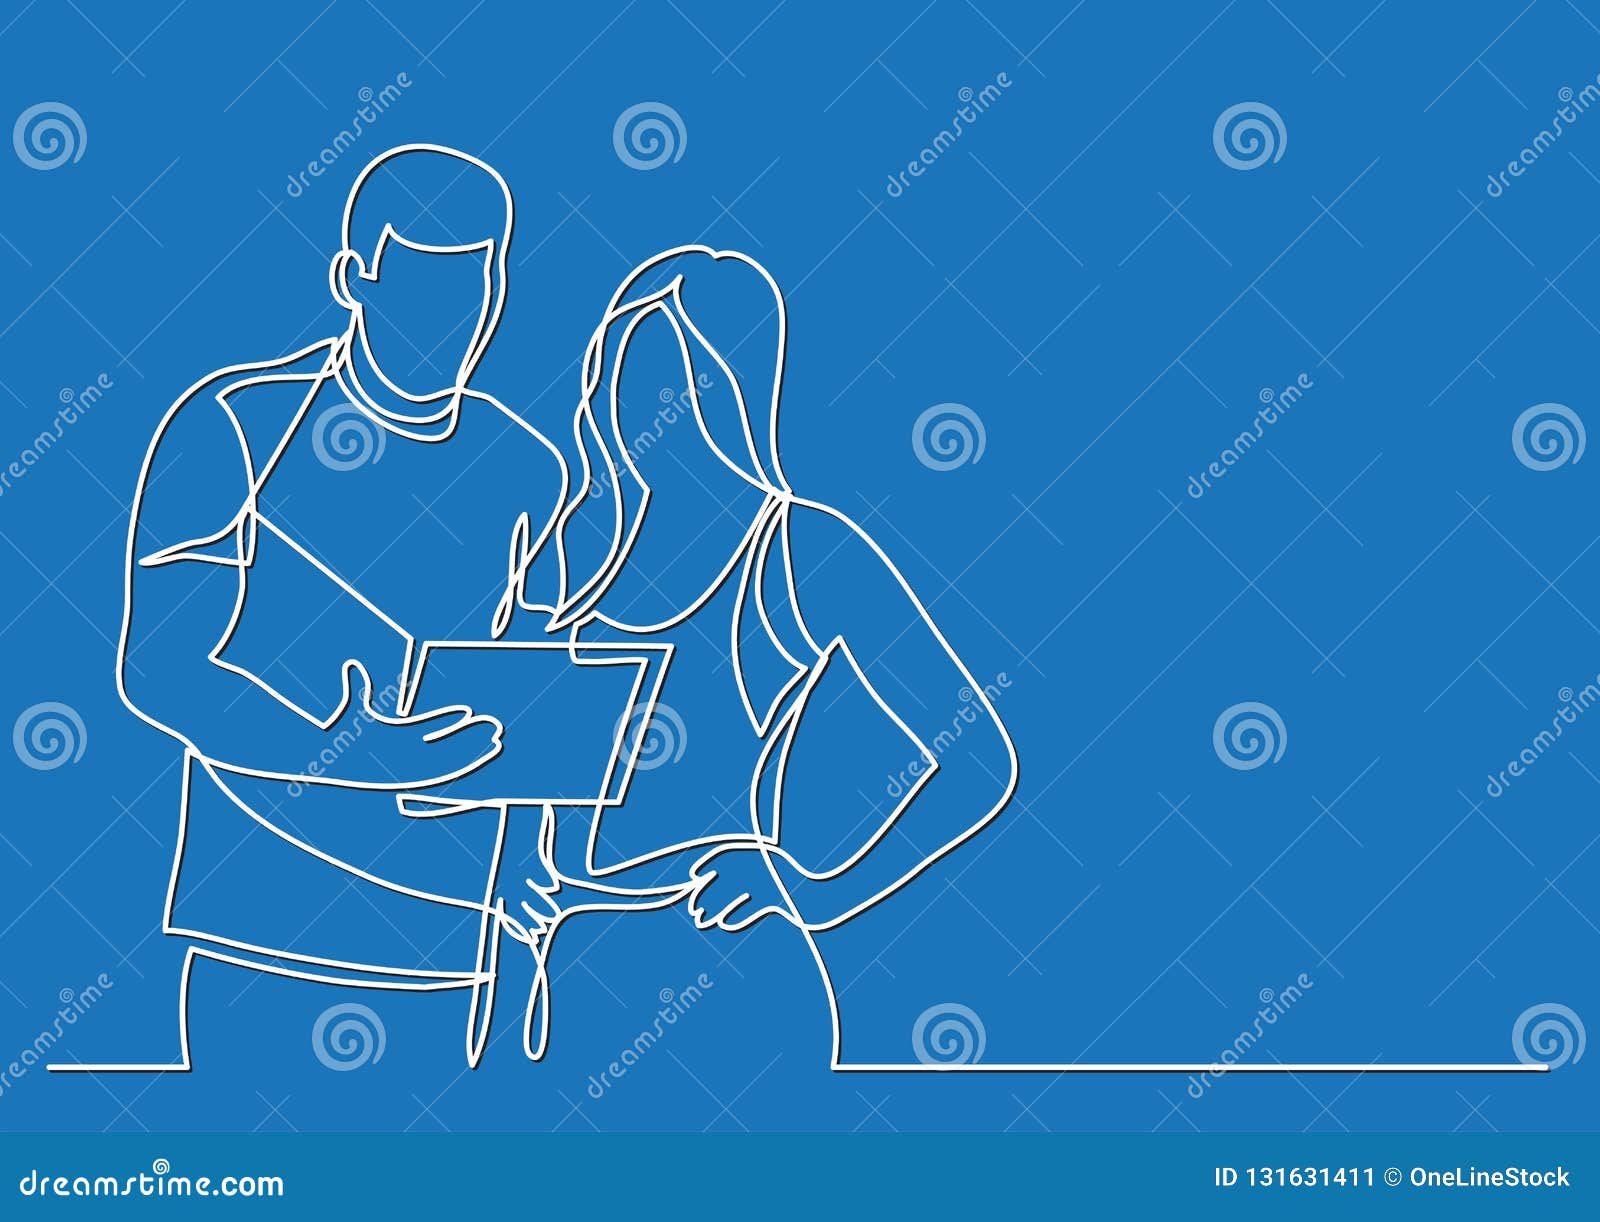 standing man and woman discussing paperworks - continuous line drawing